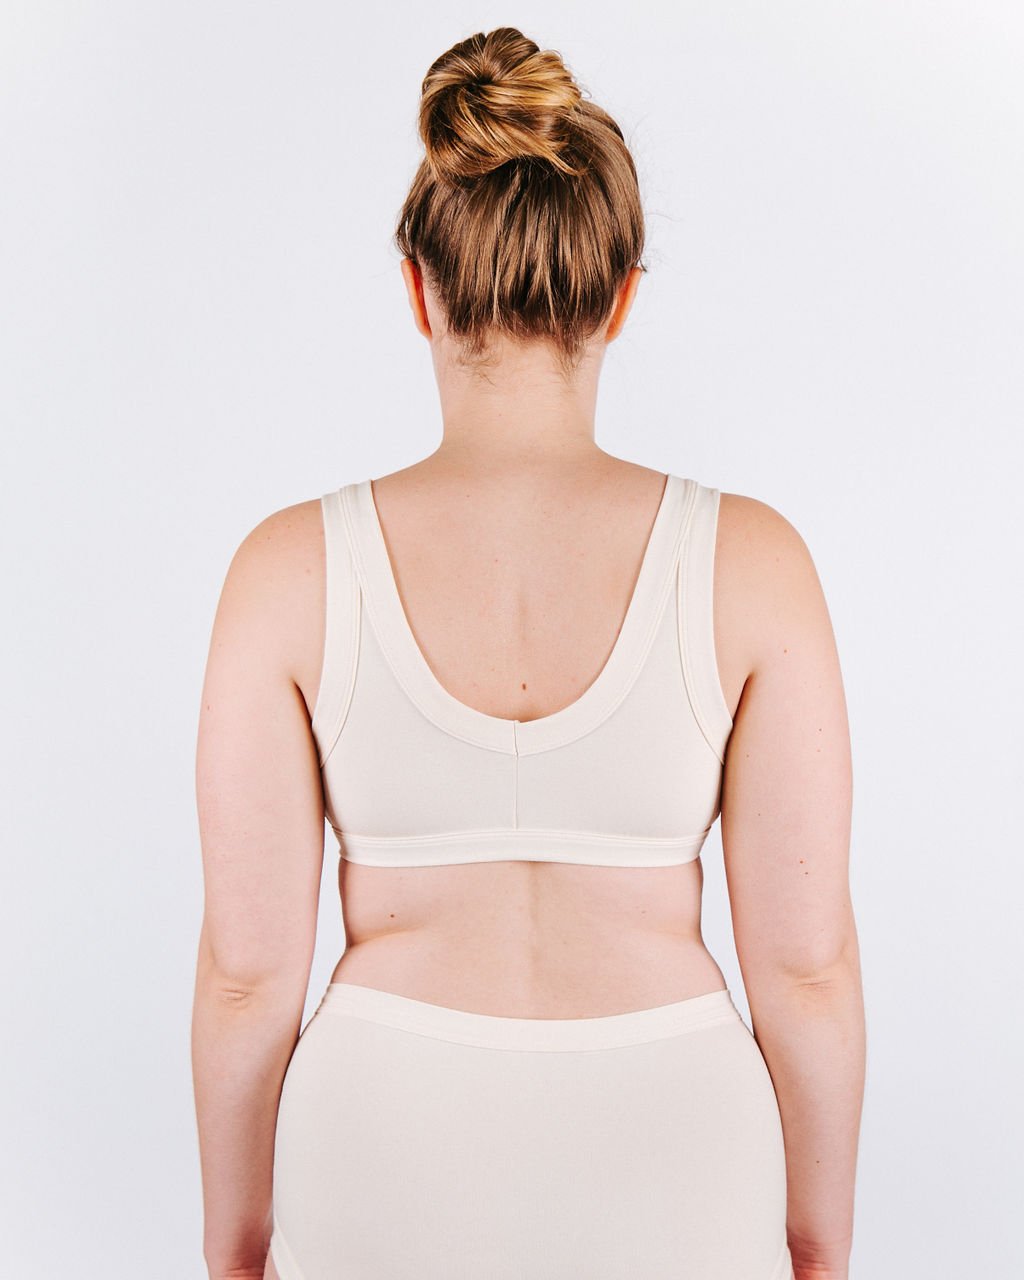 Fit photo from the back of Thunderpants organic cotton Bralette and Women’s Original Style underwear in off-white on a woman.